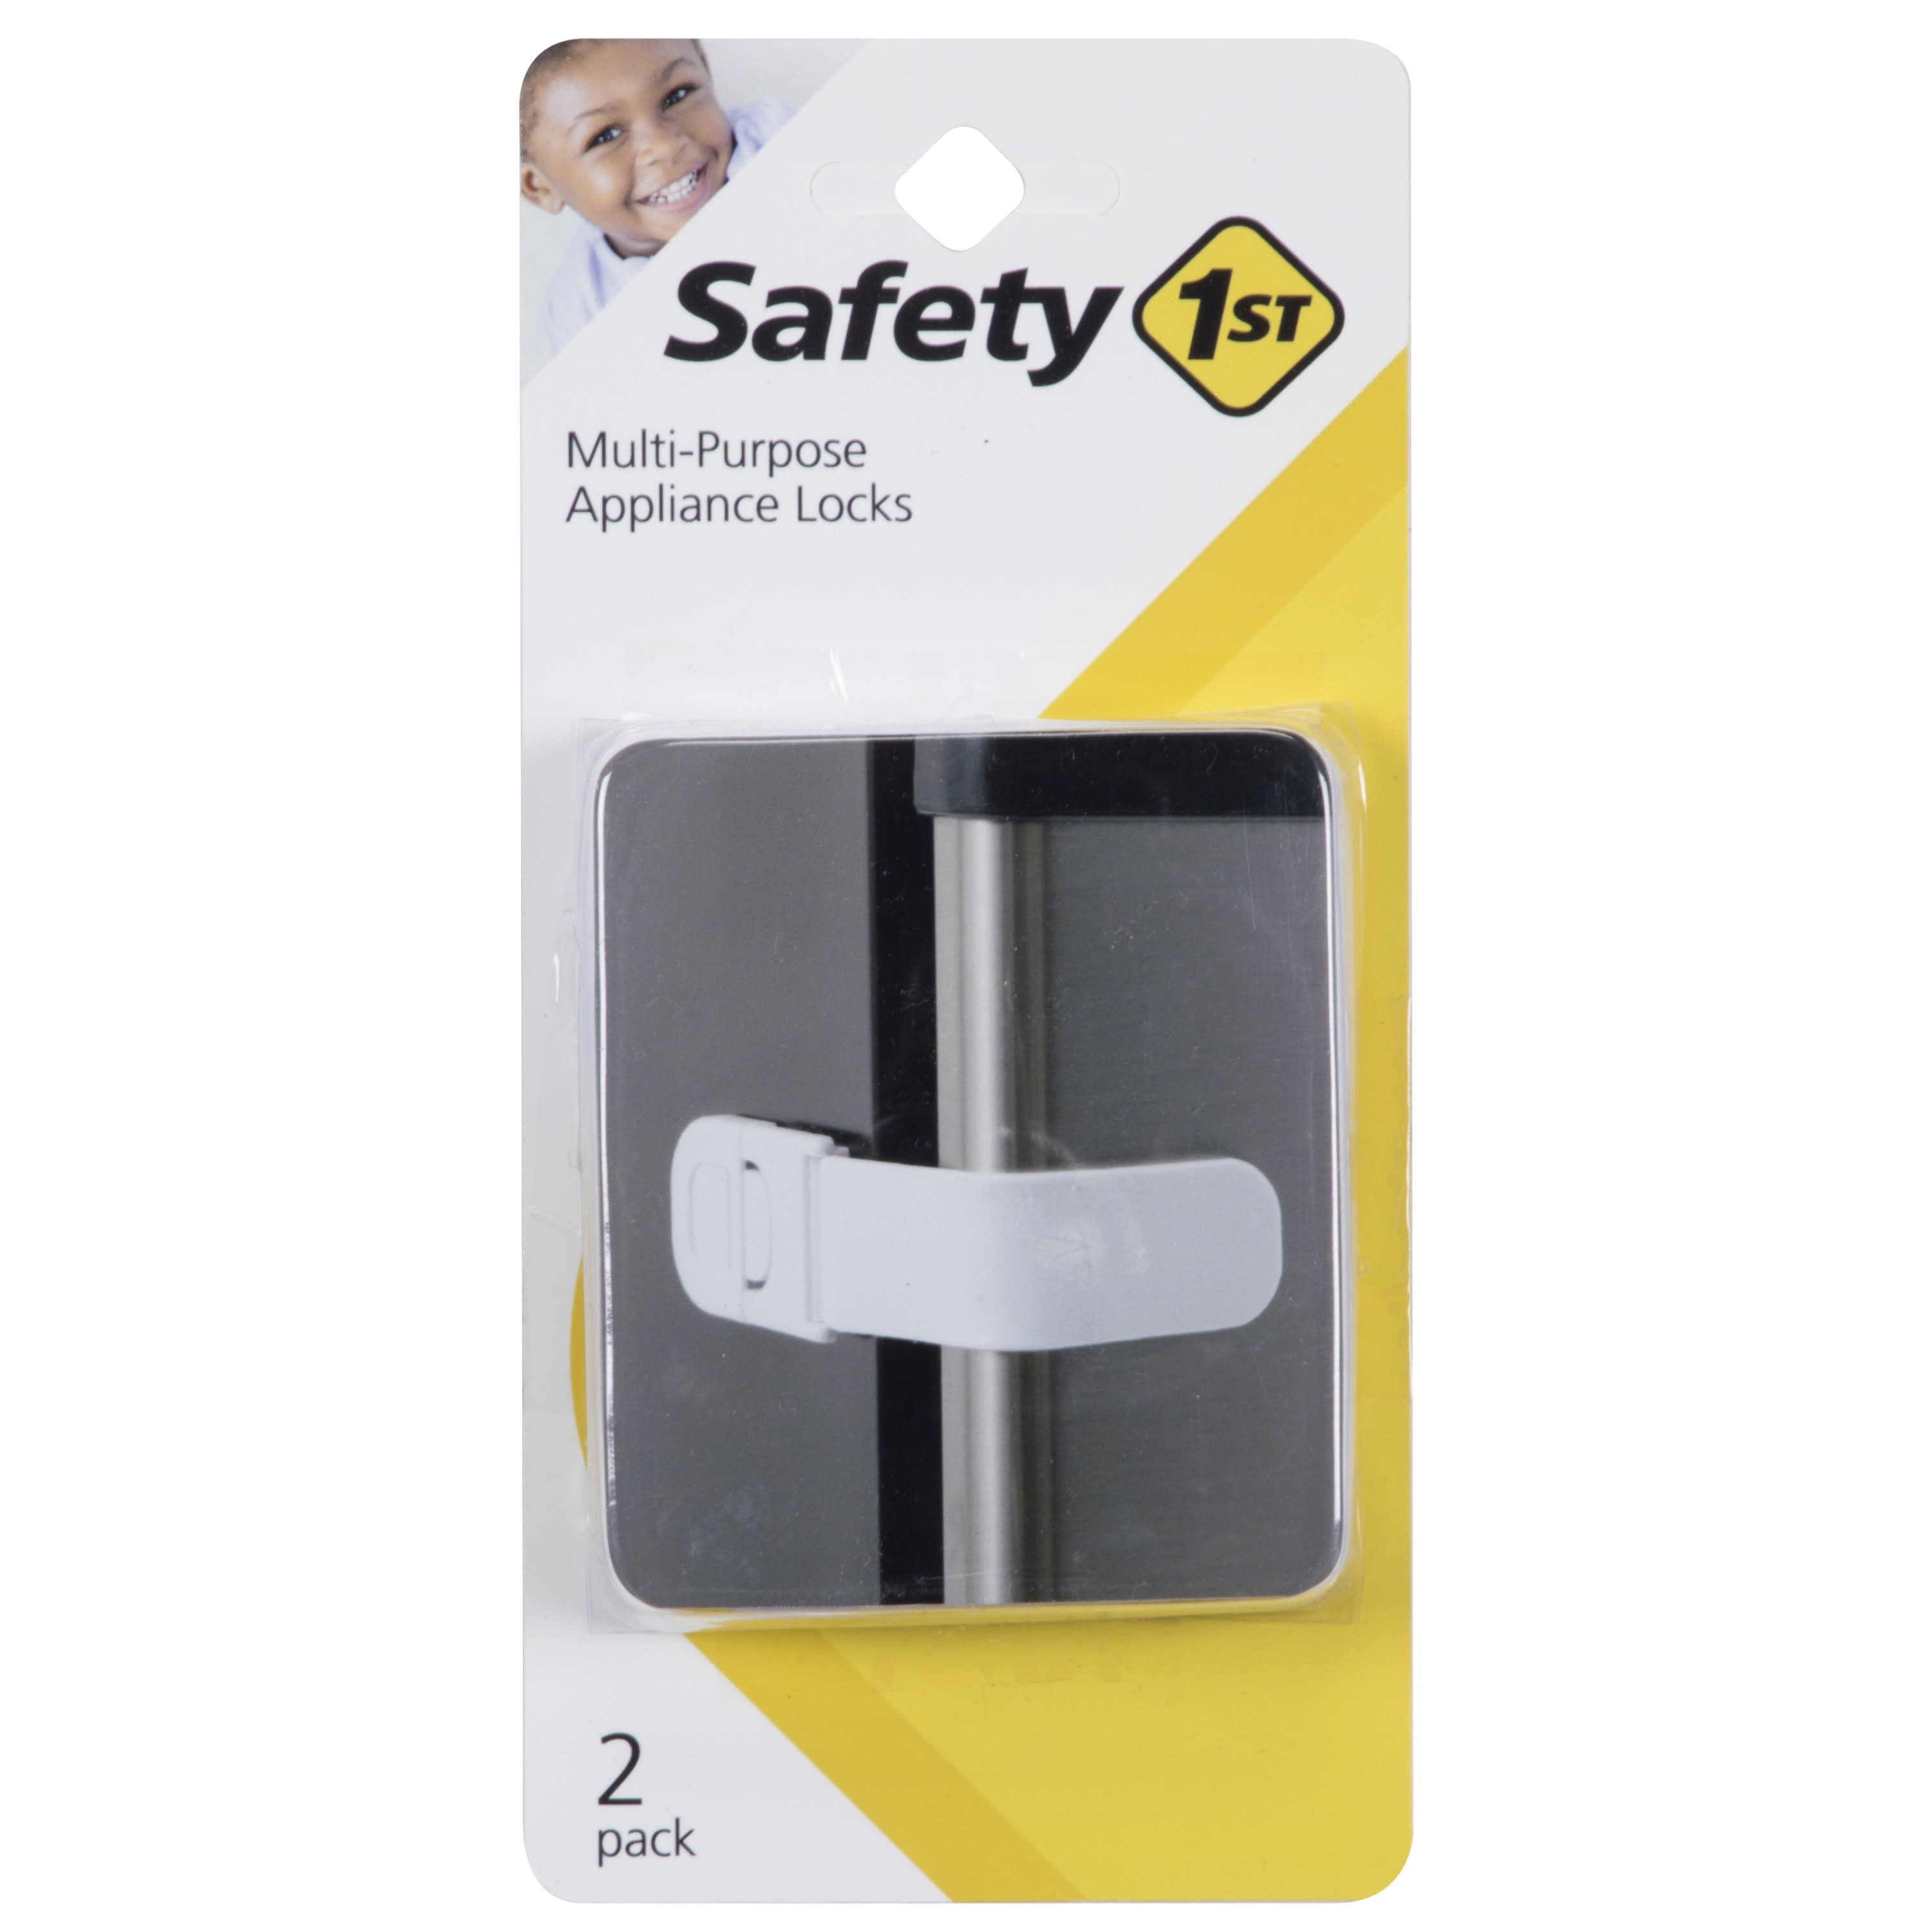 Safety 1st Hs155 Multi-Purpose Appliance Lock White 2-Pack